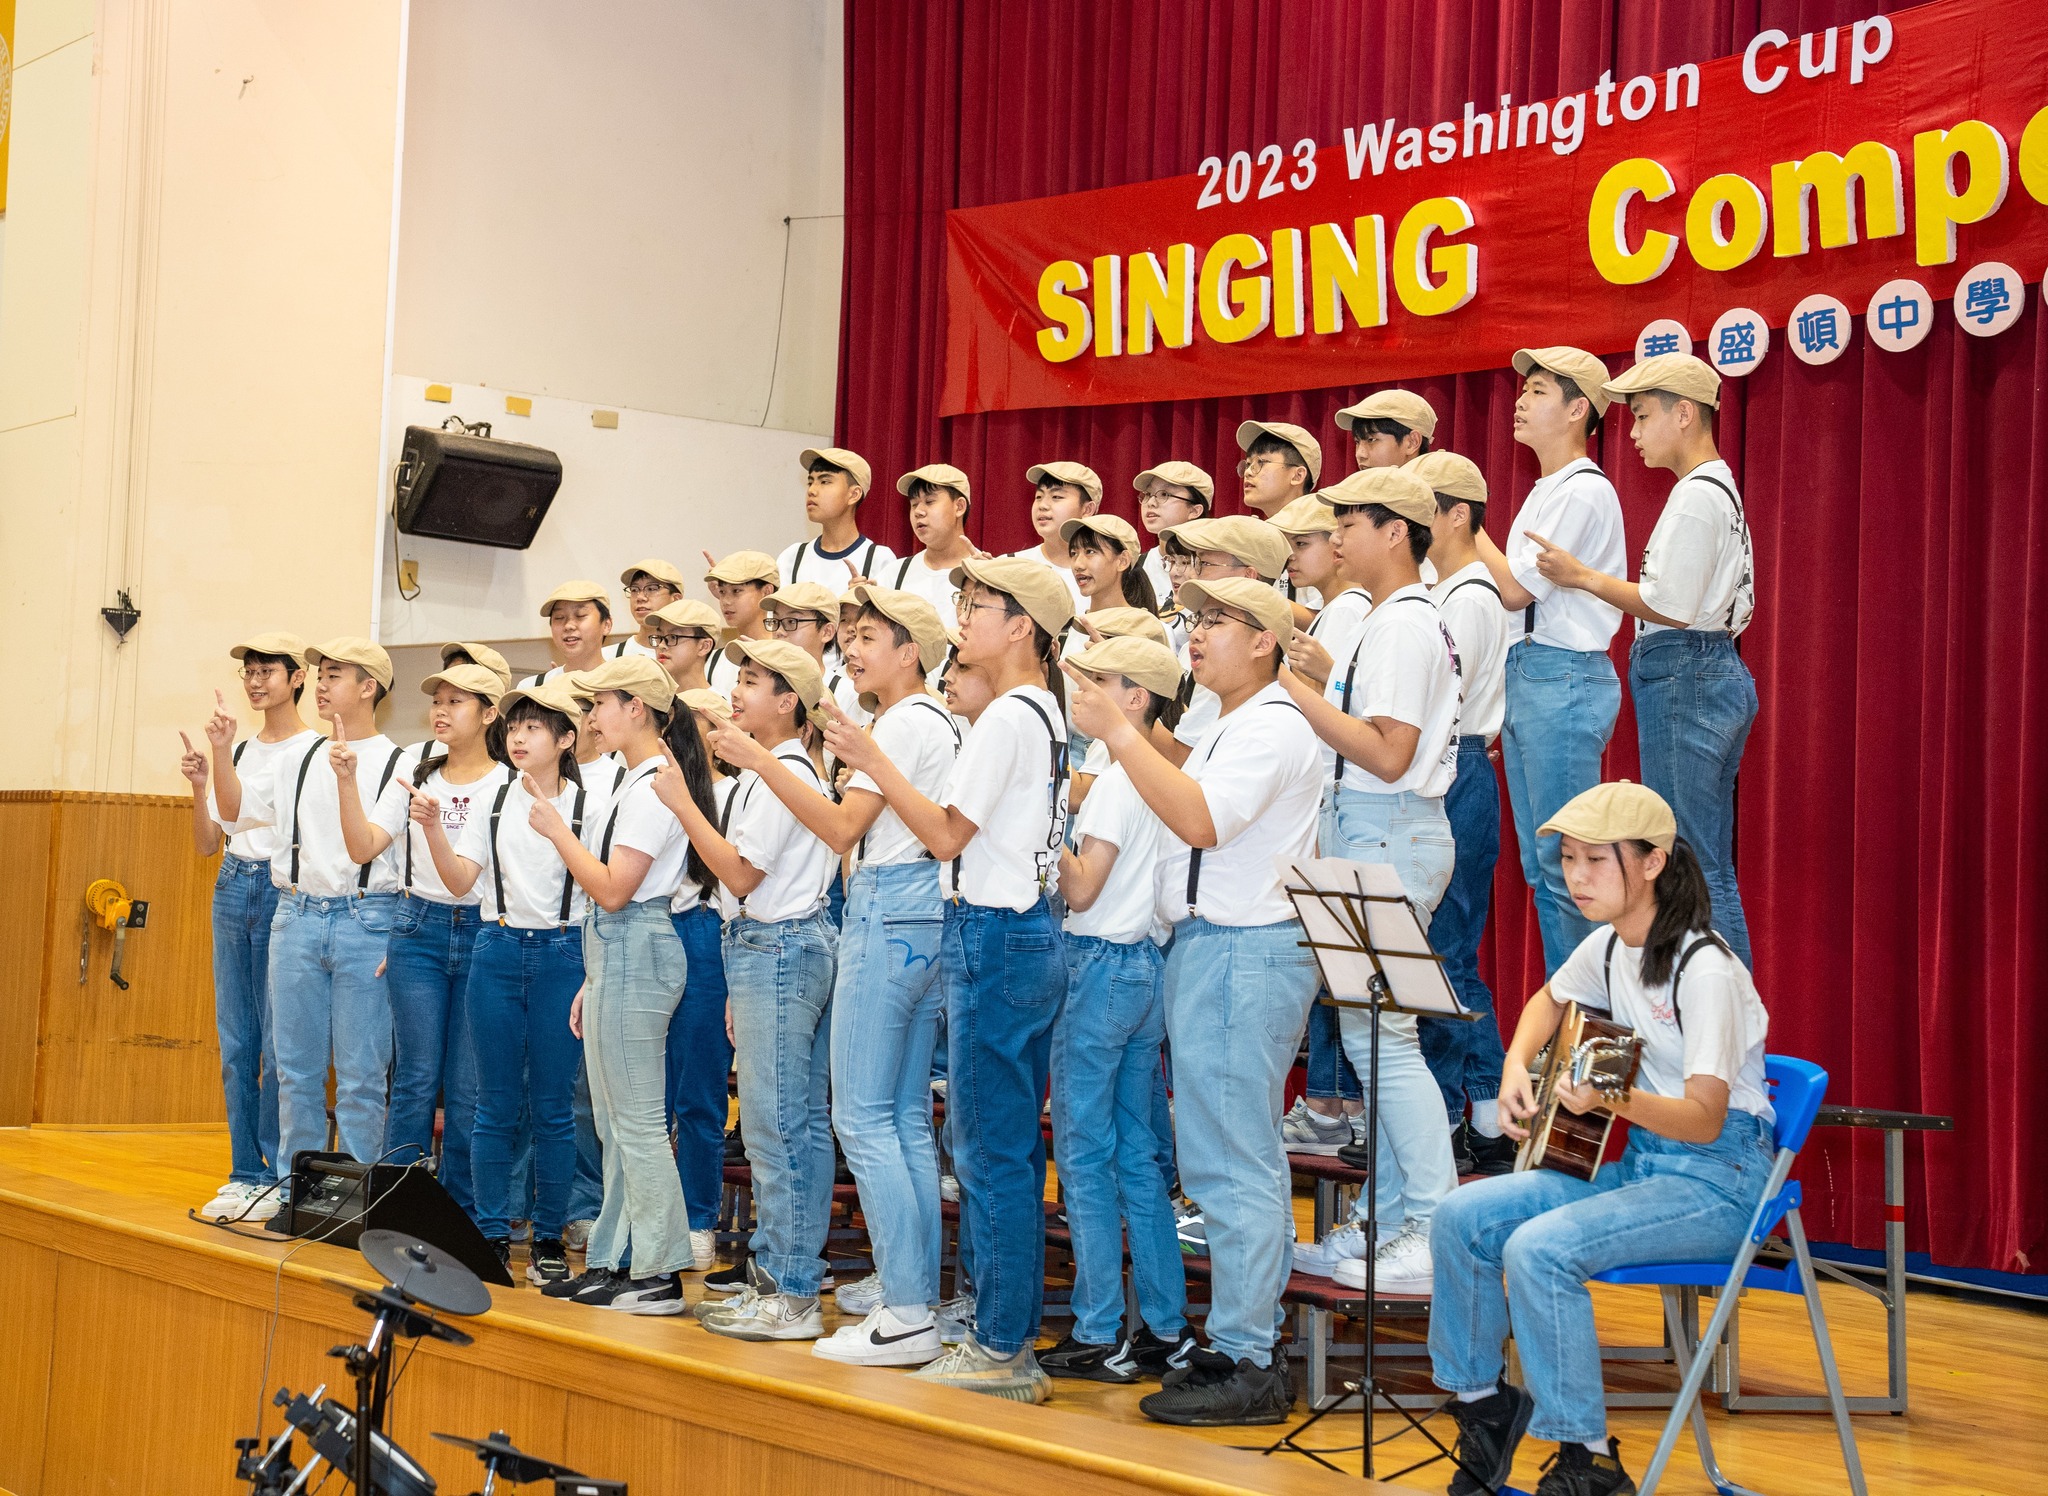 2023 Washington Cup Singing Competition